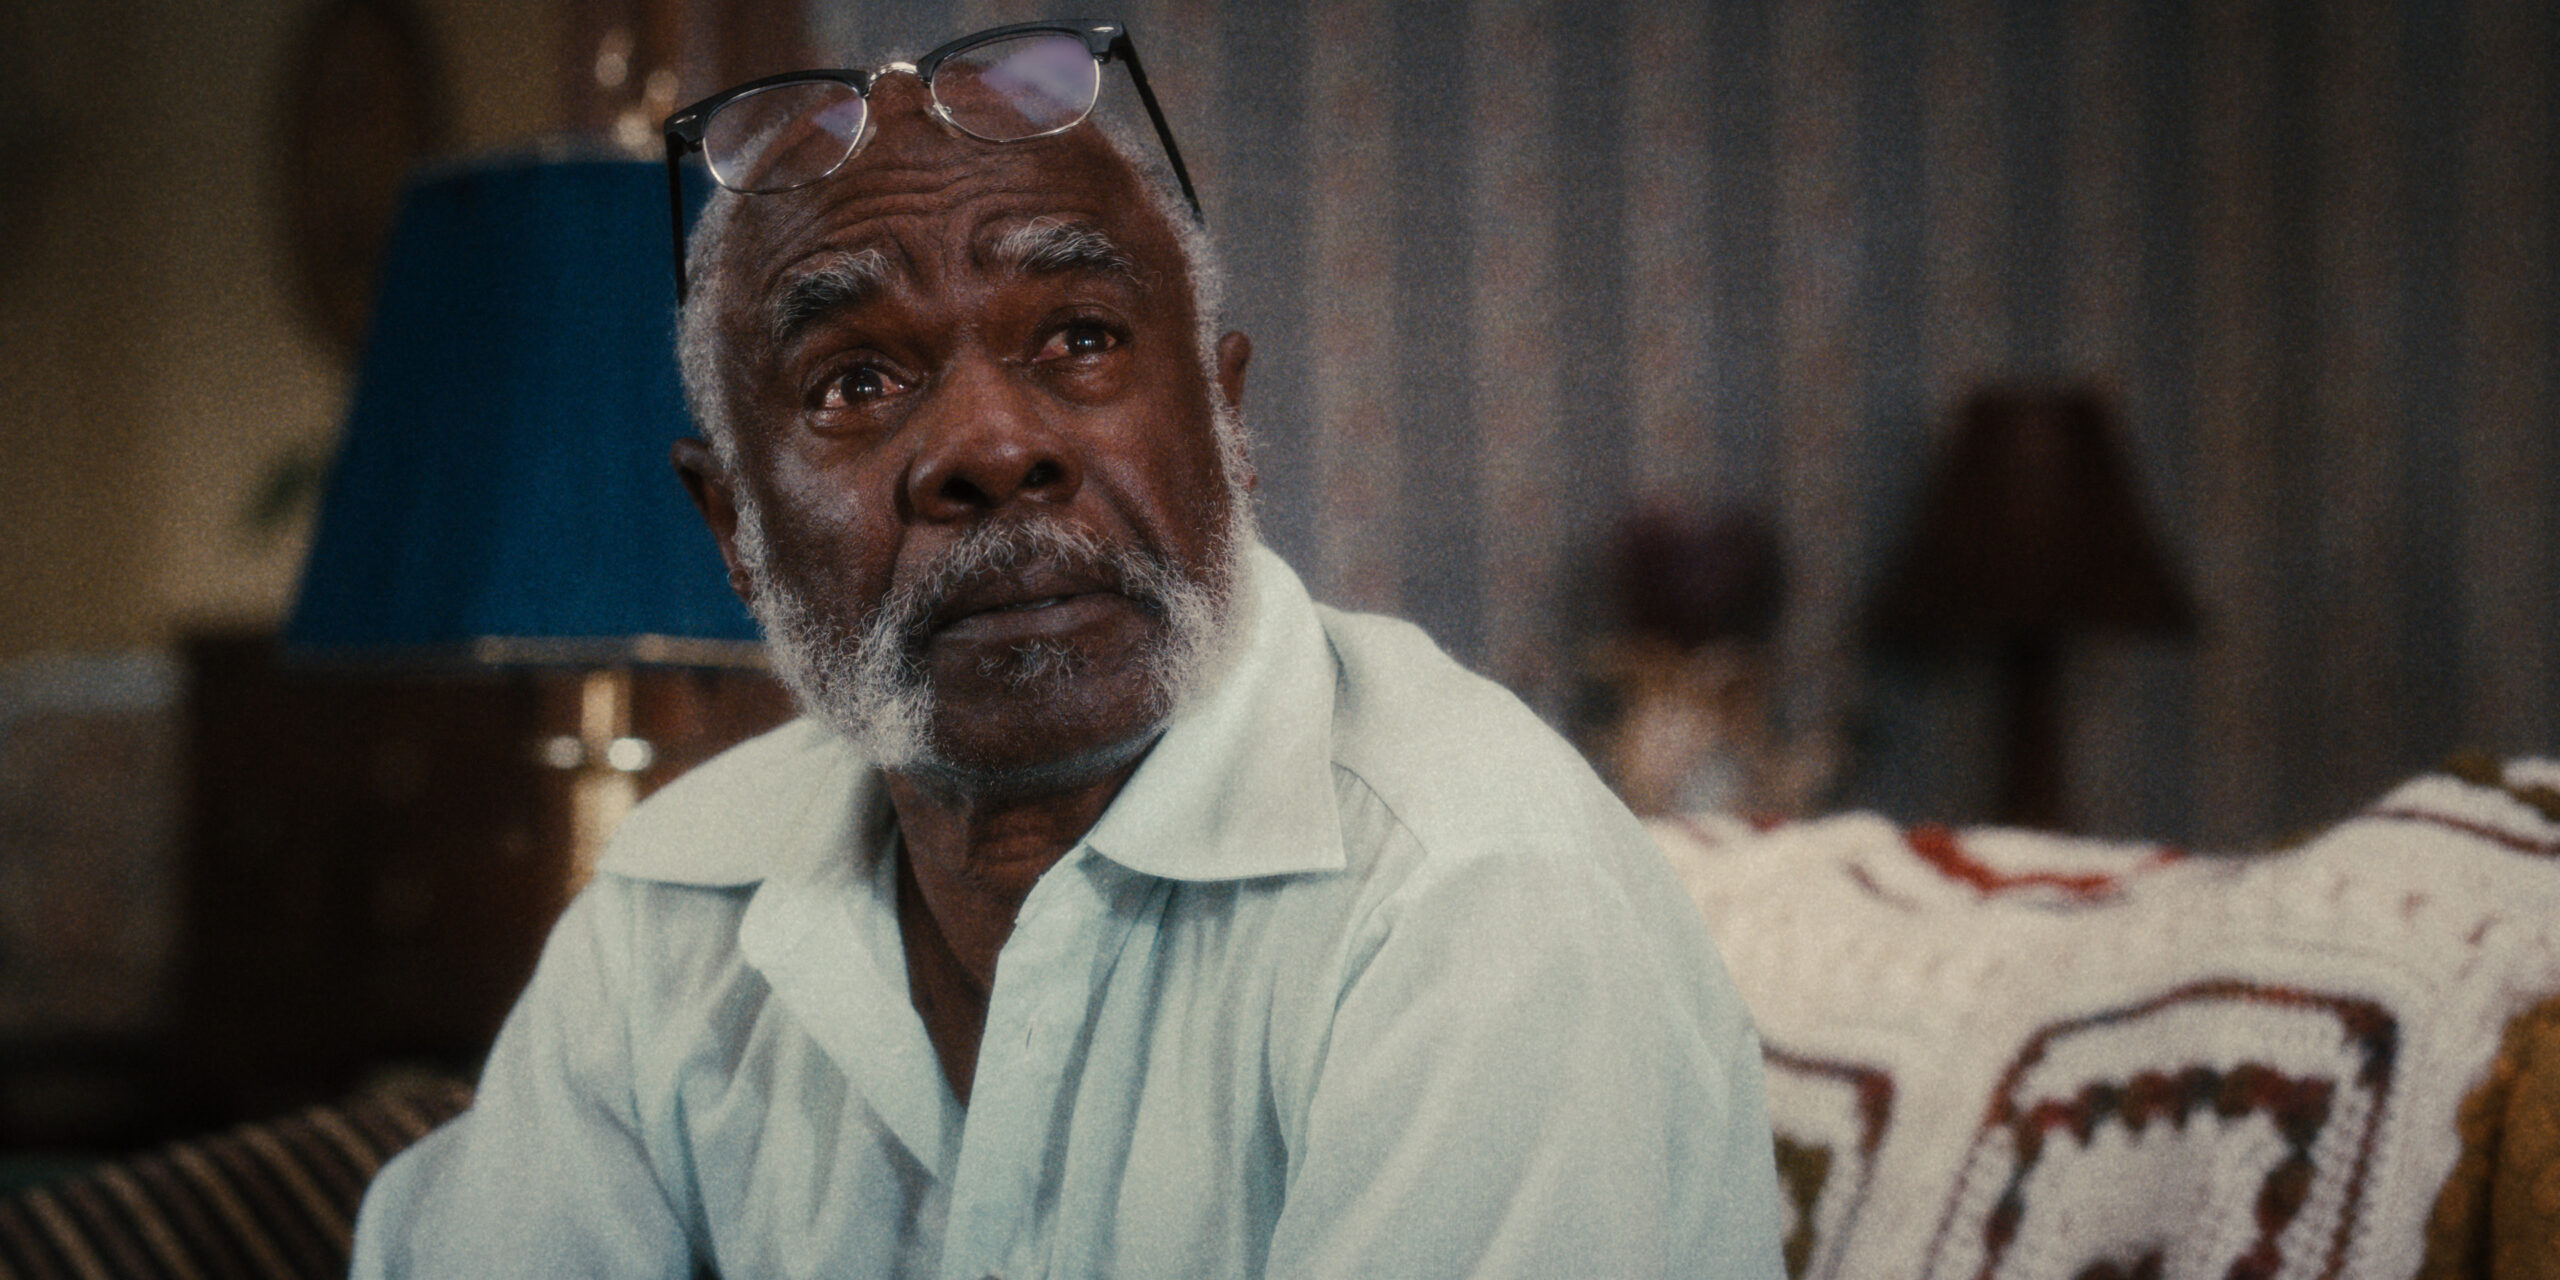 Glynn Turman On His Role As Huey P. Newton's Father Walter In Apple TV+'s 'The Big Cigar': 'He Was An Activist In His Own Right'